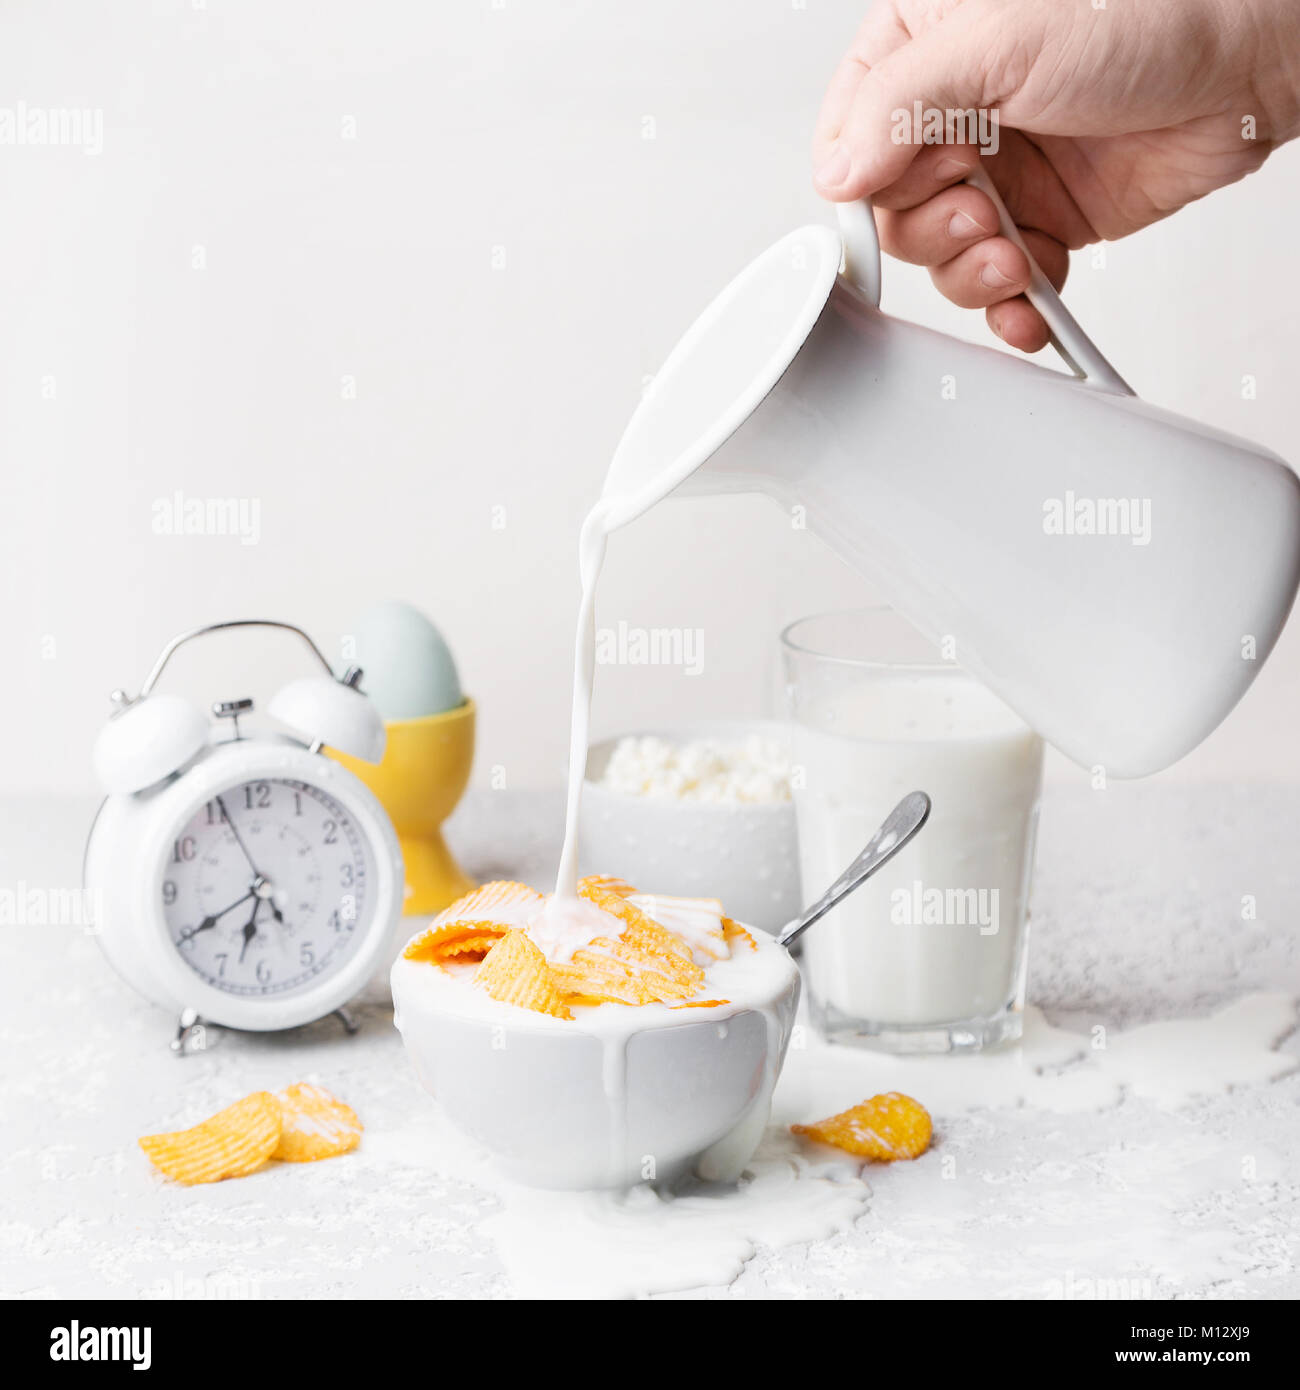 Man hand pouring milk to white bowl with heap of golden crispy potato chips on white background, copy space. Unhealthy food concept Stock Photo